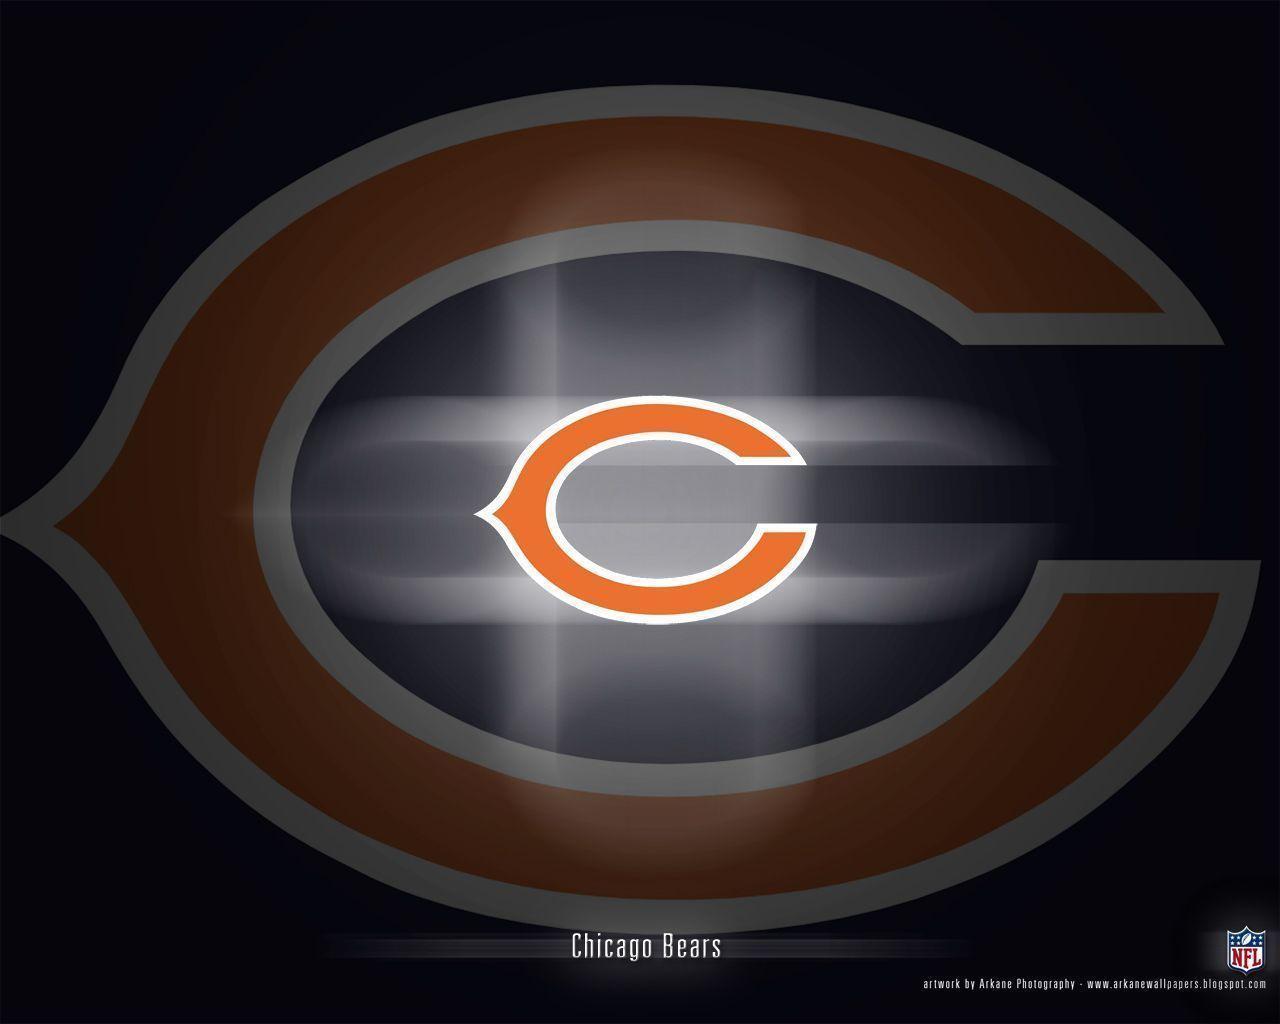 Background of the day: Chicago Bears wallpaper. Chicago Bears